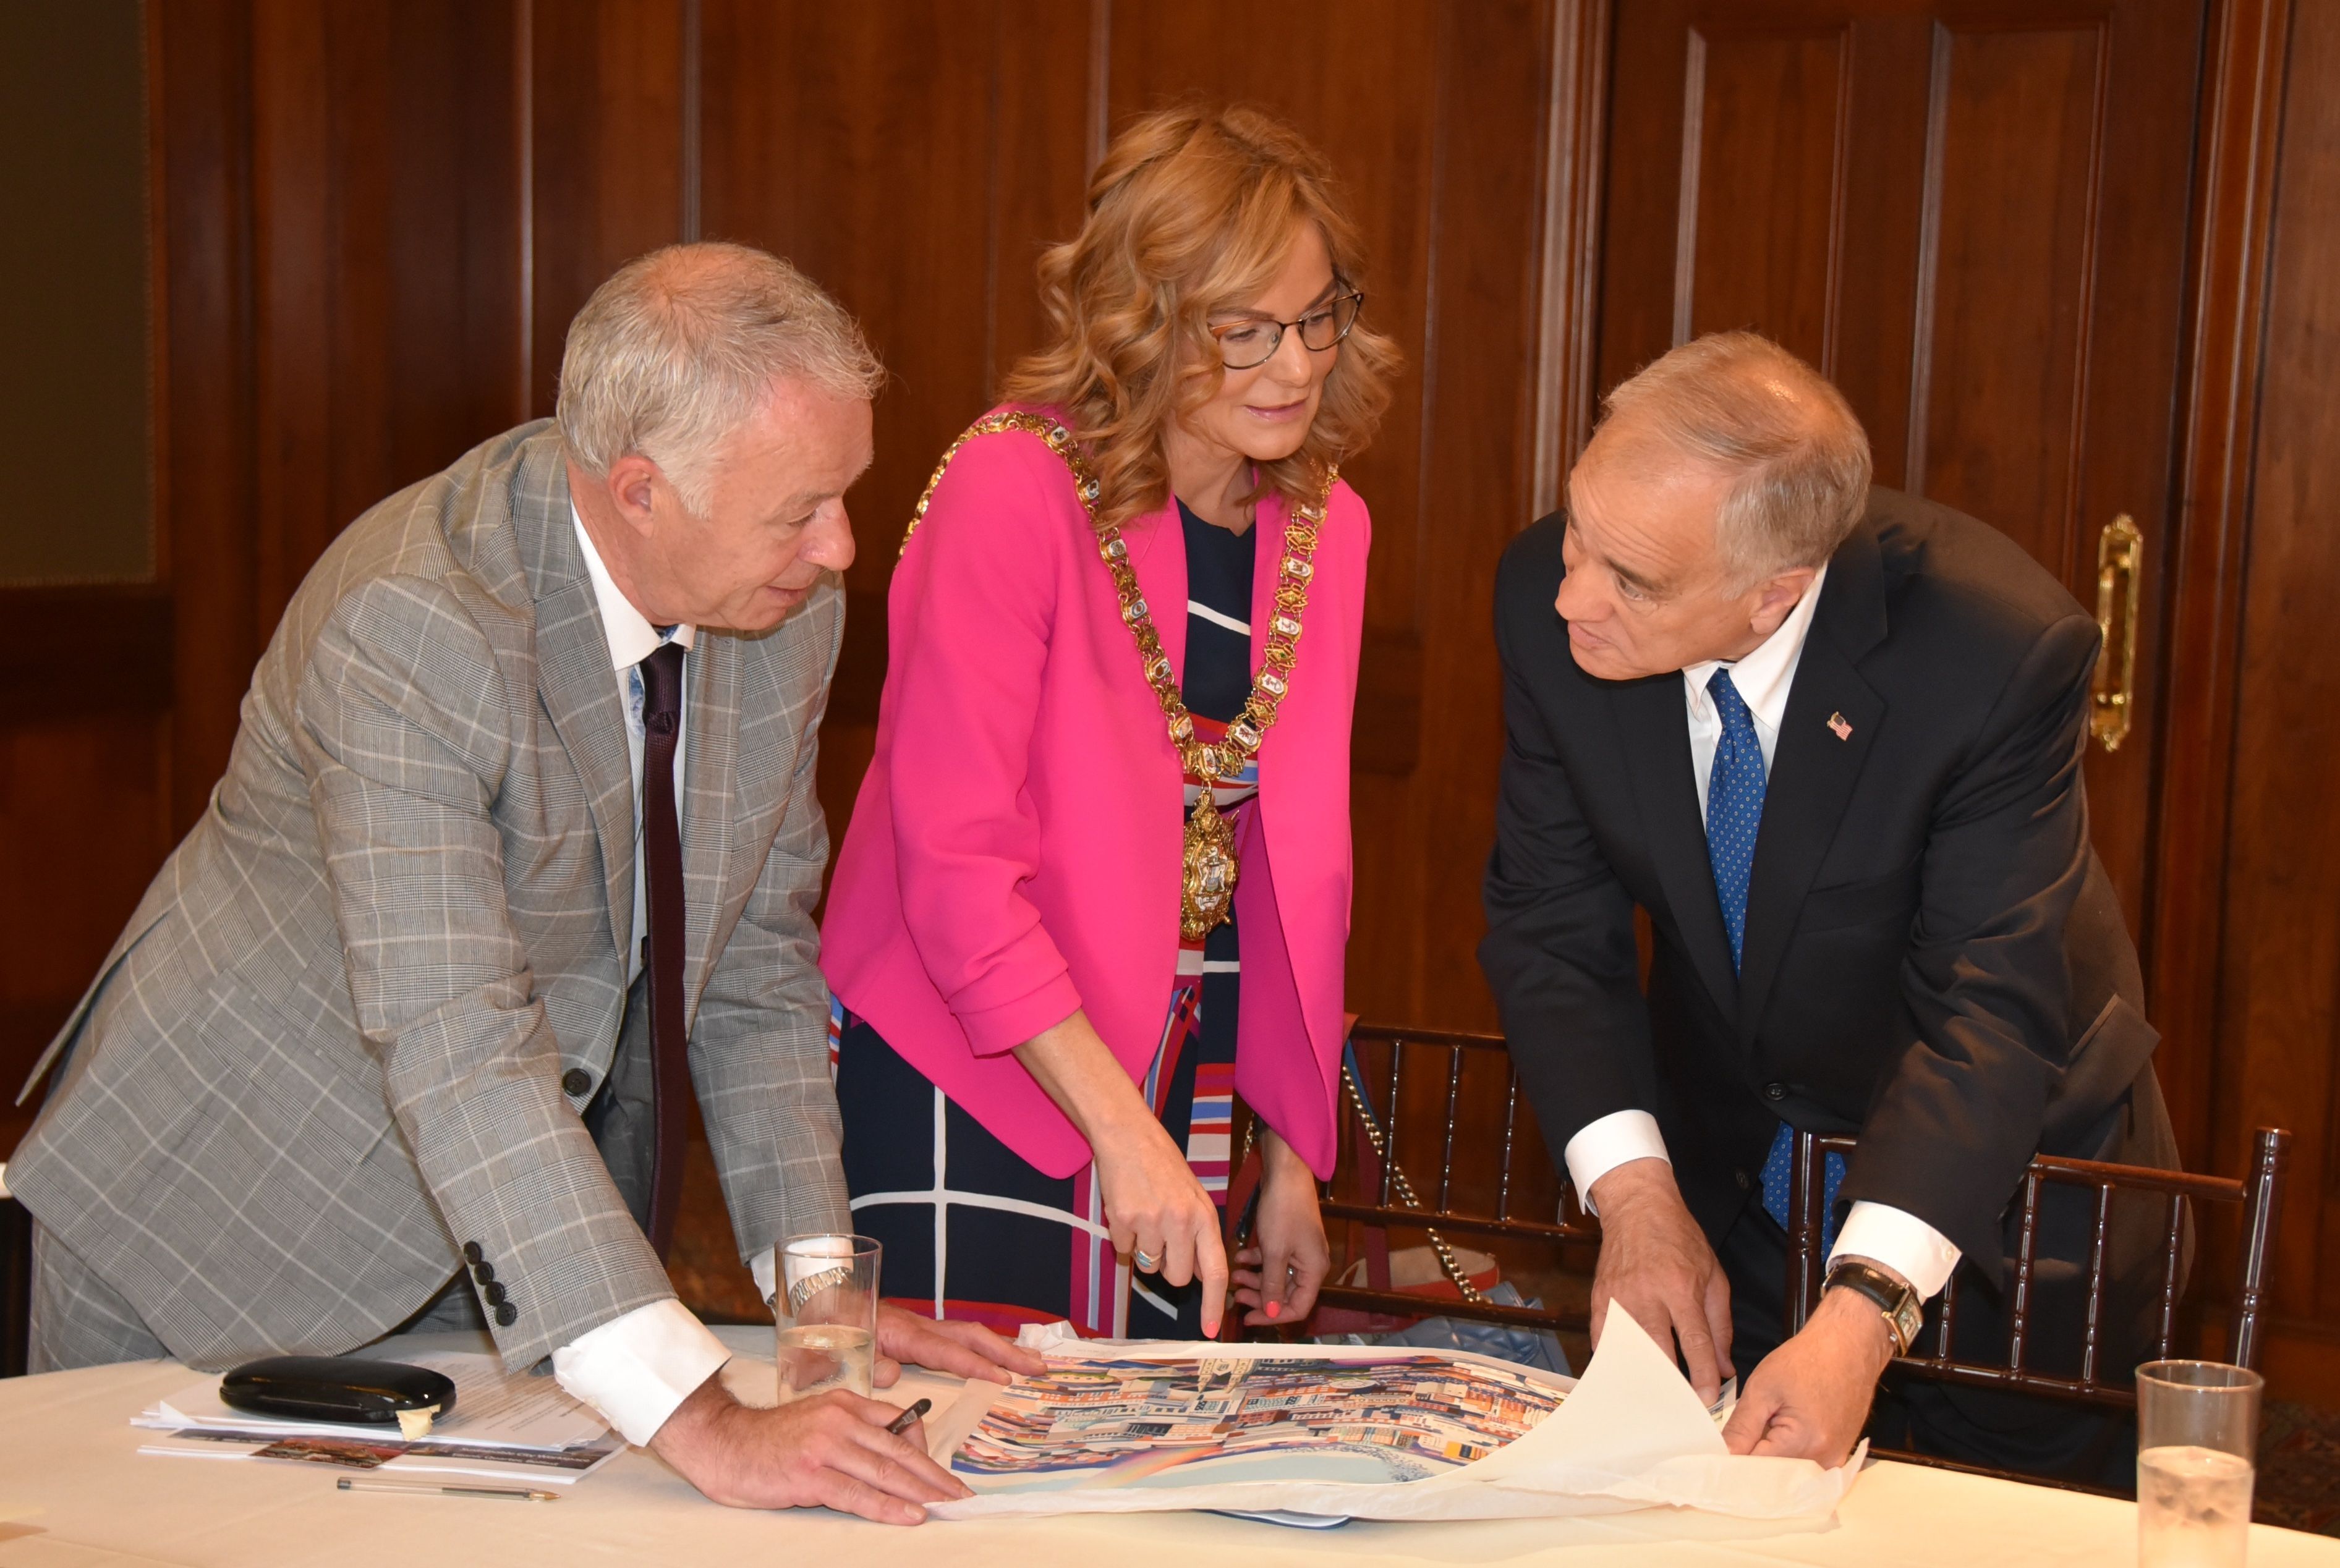 \'MAKE NO LITTLE PLANS\': Comptroller Tom DiNapoli reviews new development plans for Belfast with Belfast City Council CEO John Walsh and Lord Mayor Tina Black